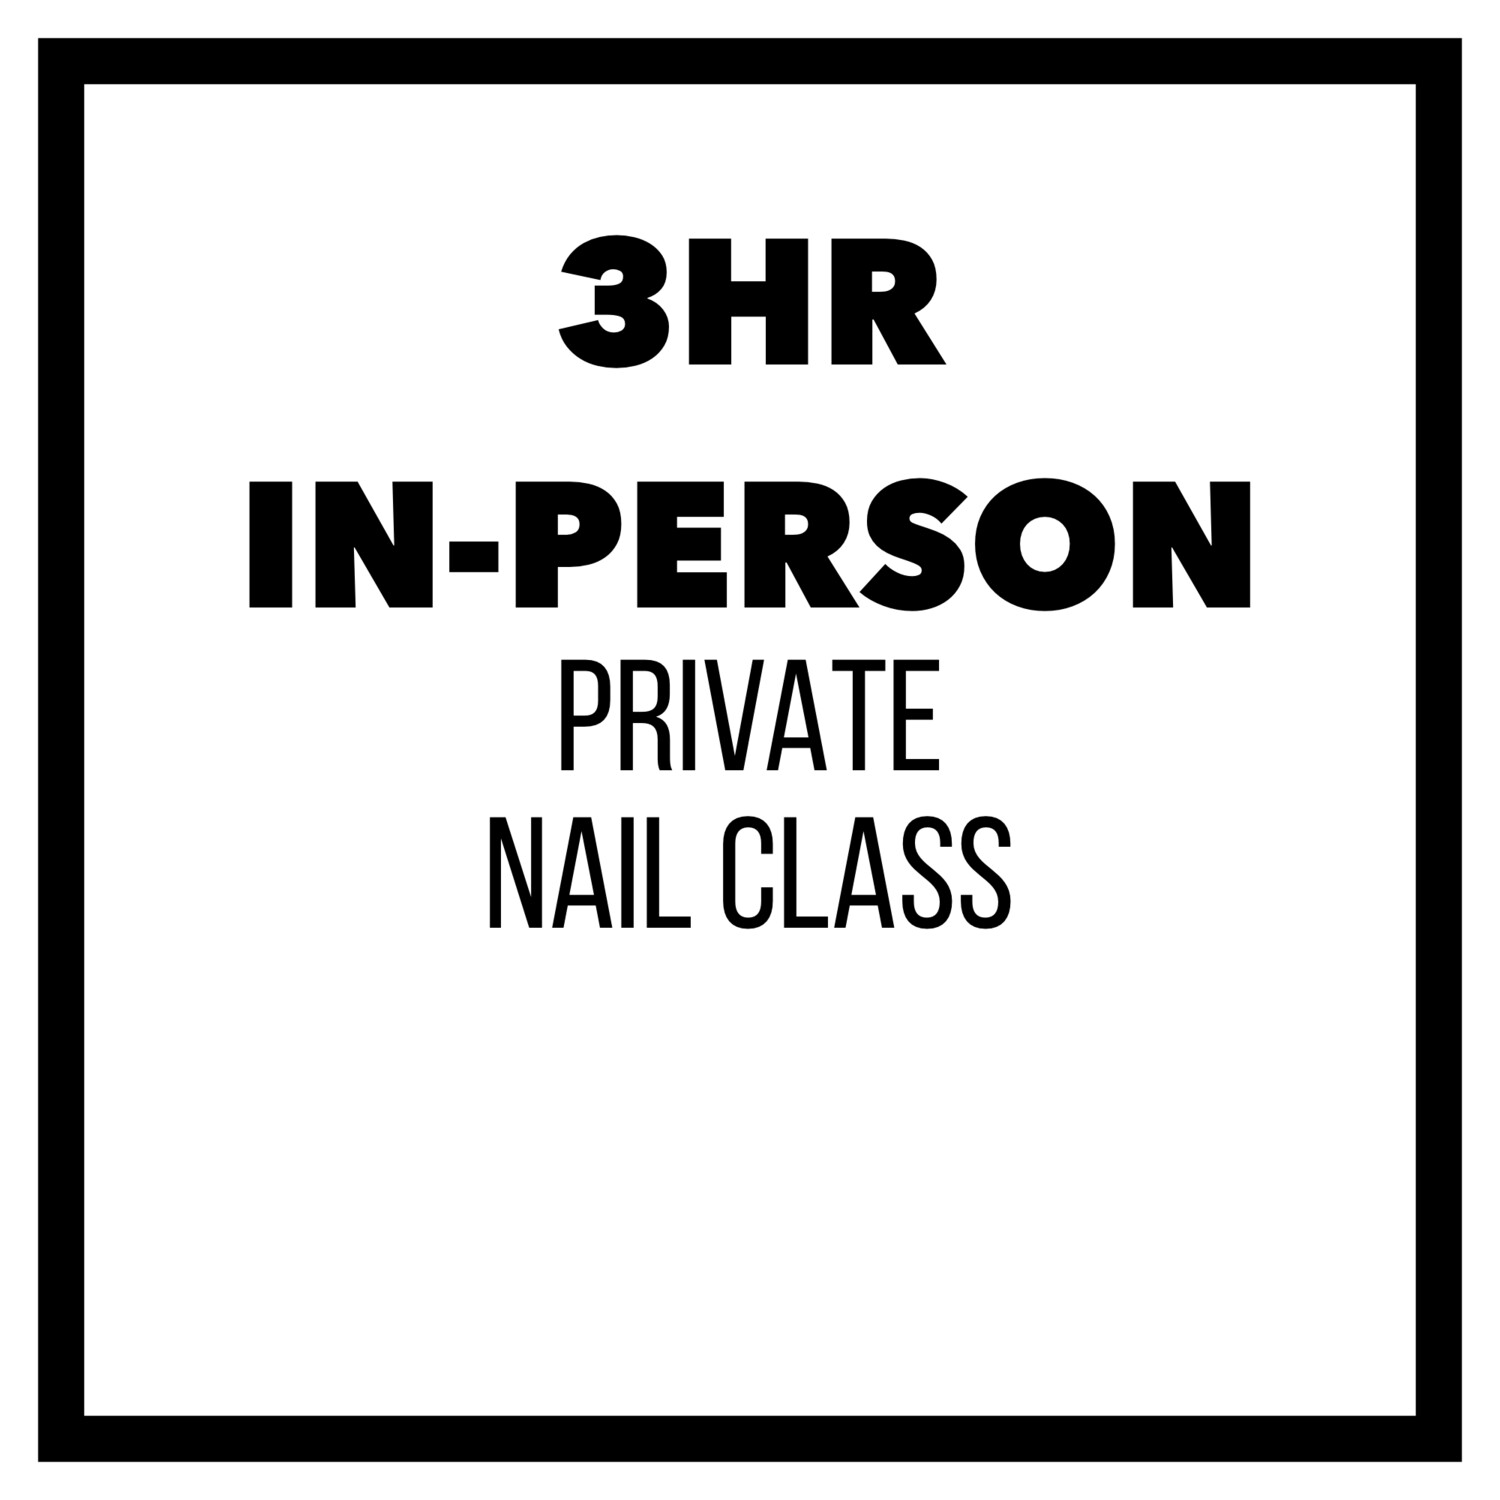 3HR IN-PERSON PRIVATE NAIL CLASS